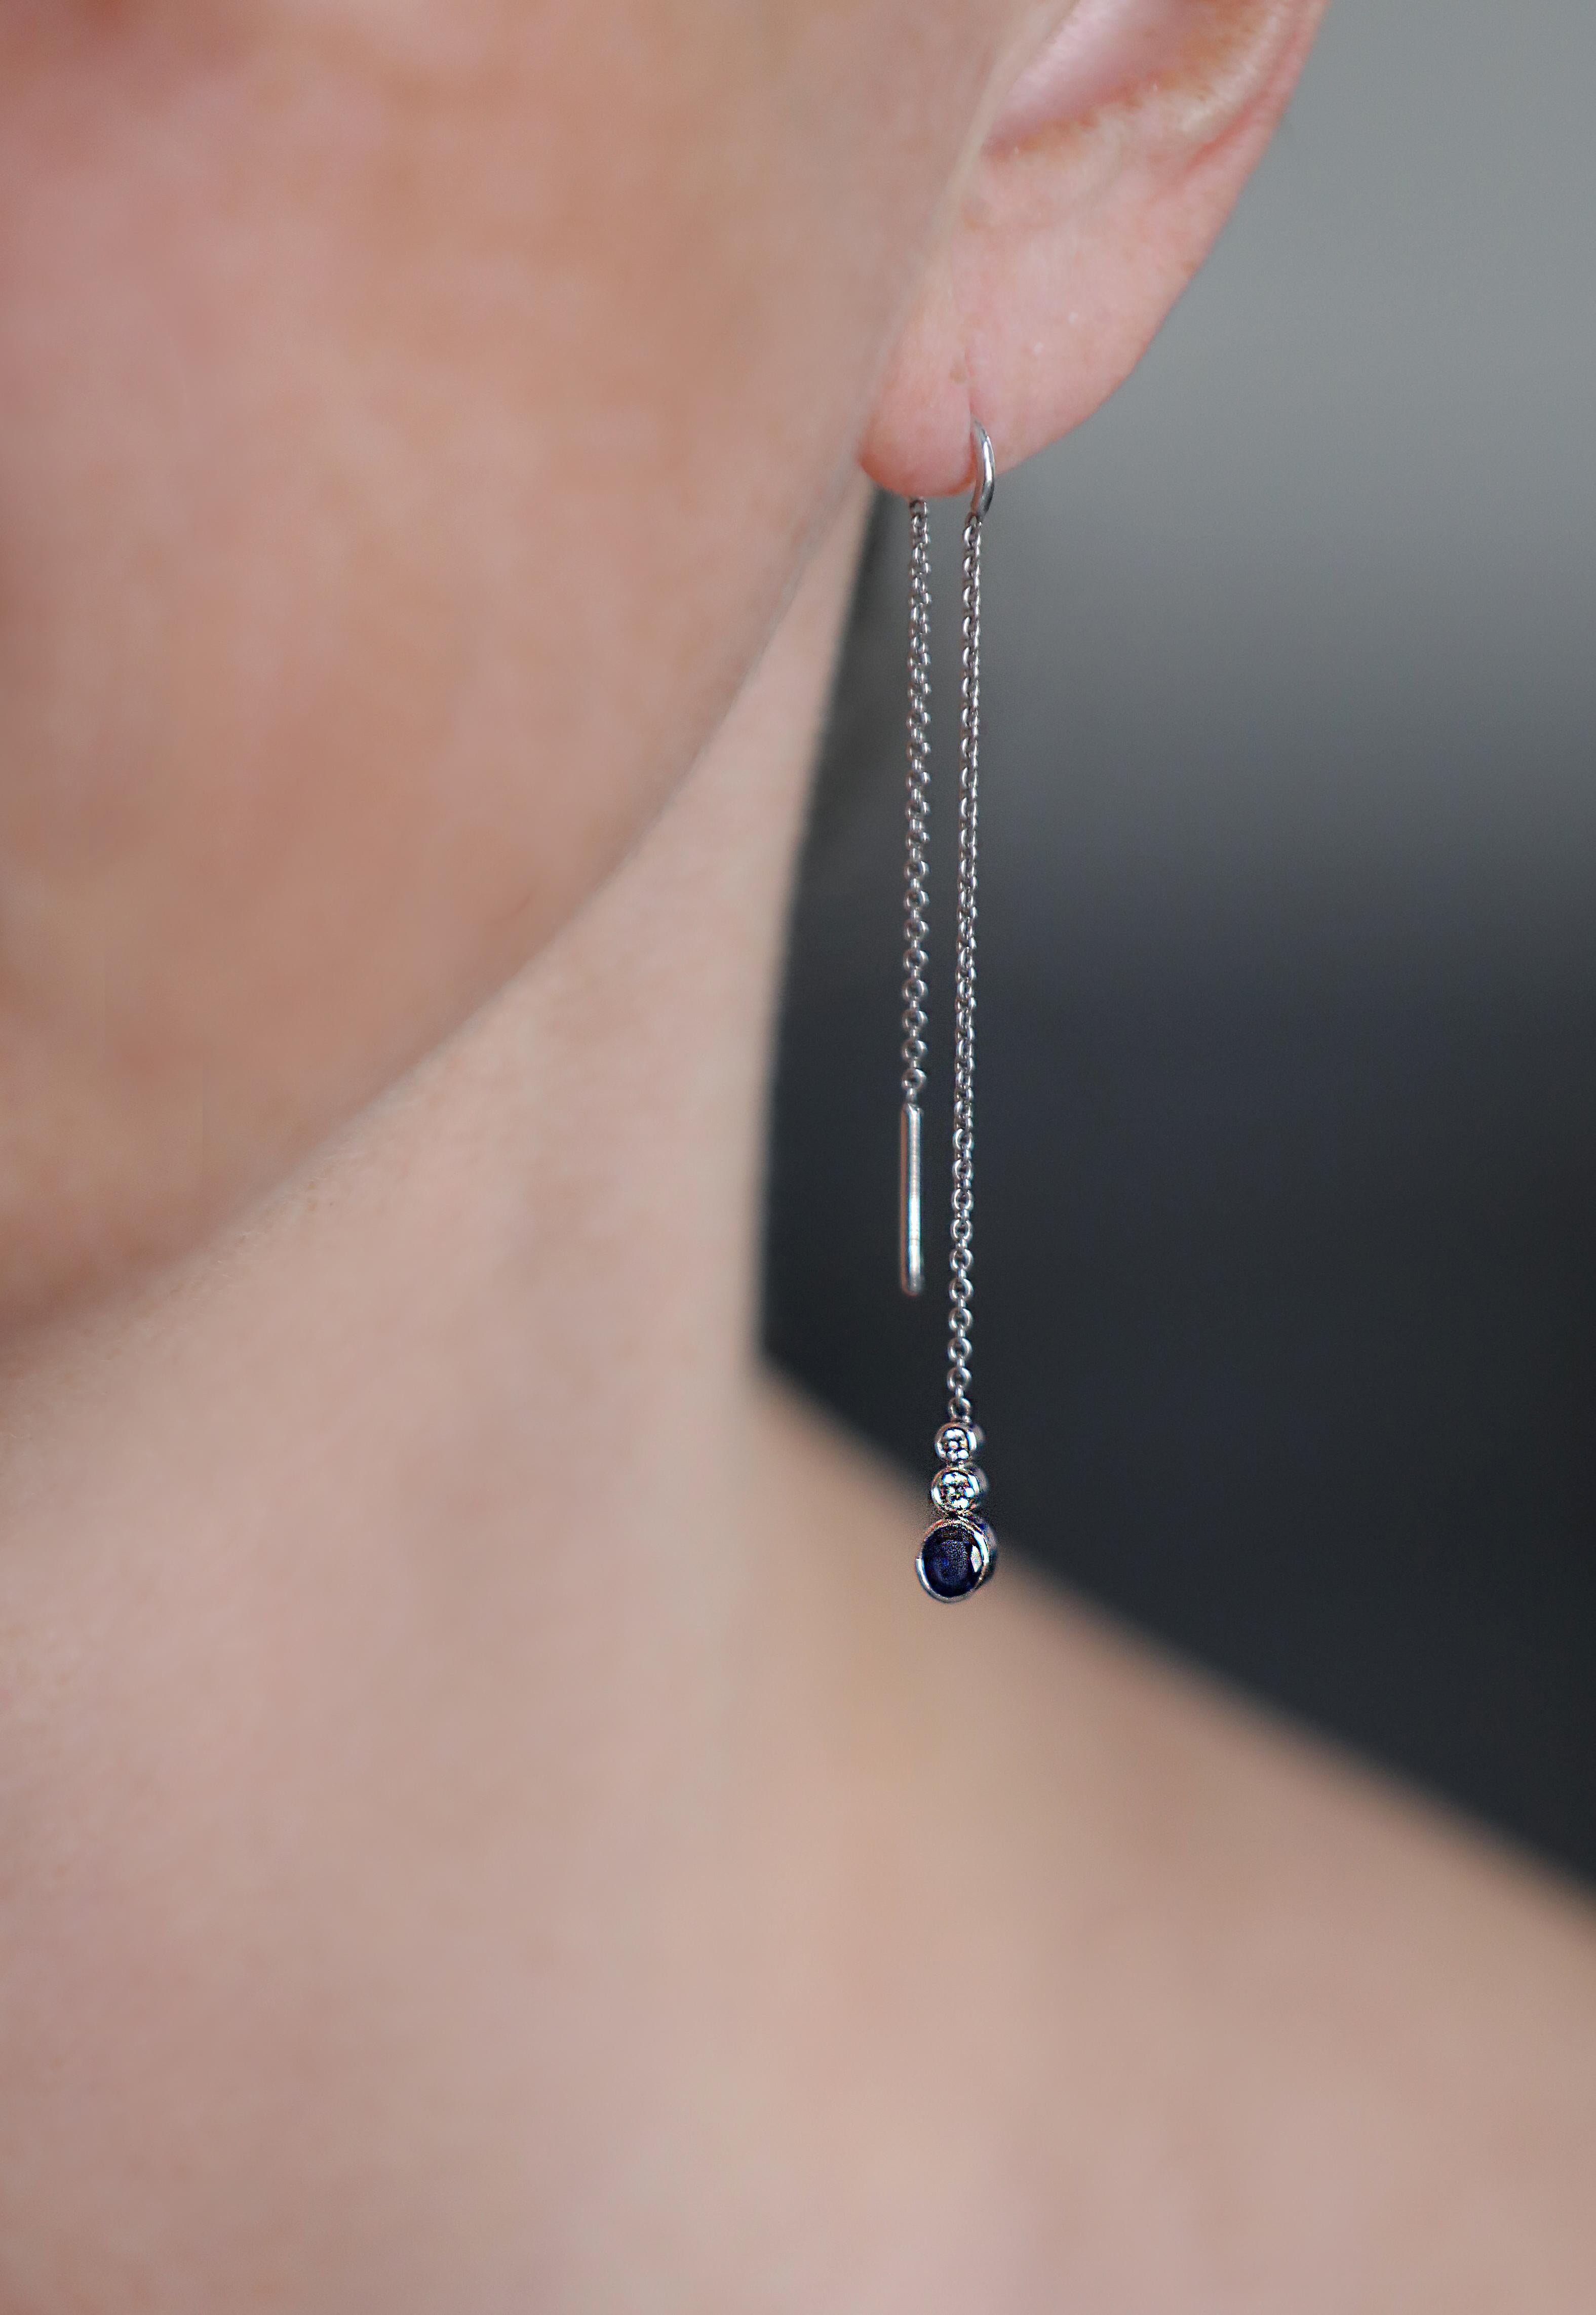 Oval Cut White Gold Threadthrough Earrings in Blue Oval Sapphire and Diamonds